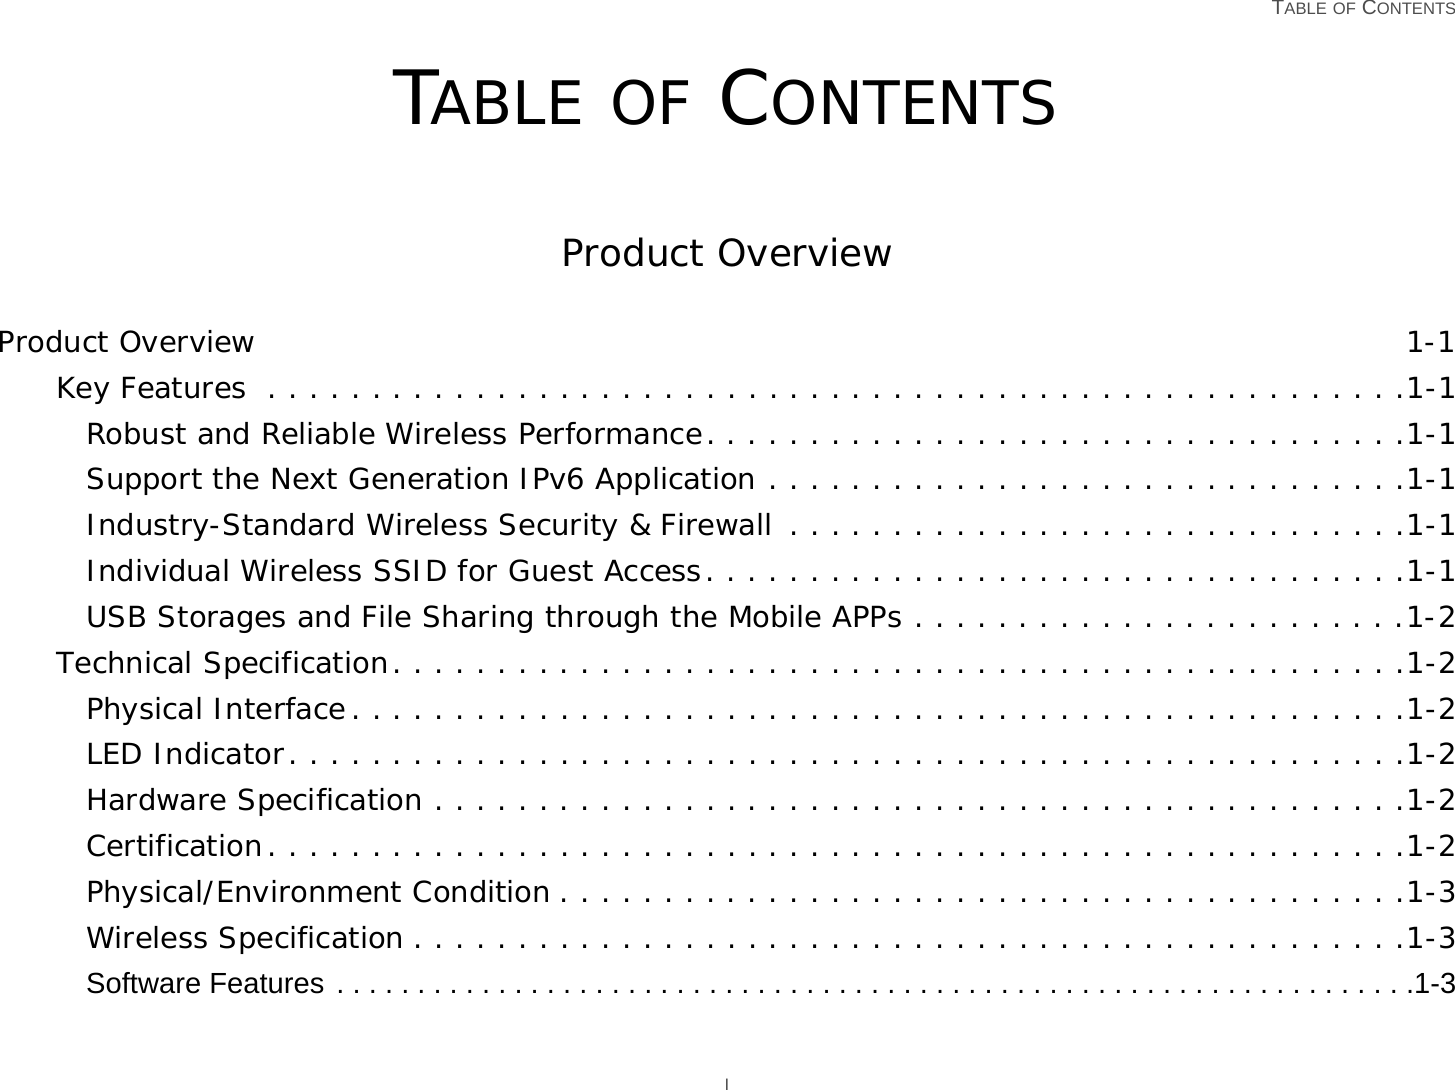   TABLE OF CONTENTS ITABLE OF CONTENTSProduct OverviewProduct Overview 1-1Key Features  . . . . . . . . . . . . . . . . . . . . . . . . . . . . . . . . . . . . . . . . . . . . . . . . . . . . . . .1-1Robust and Reliable Wireless Performance. . . . . . . . . . . . . . . . . . . . . . . . . . . . . . . . . .1-1Support the Next Generation IPv6 Application . . . . . . . . . . . . . . . . . . . . . . . . . . . . . . .1-1Industry-Standard Wireless Security &amp; Firewall  . . . . . . . . . . . . . . . . . . . . . . . . . . . . . .1-1Individual Wireless SSID for Guest Access. . . . . . . . . . . . . . . . . . . . . . . . . . . . . . . . . .1-1USB Storages and File Sharing through the Mobile APPs . . . . . . . . . . . . . . . . . . . . . . . .1-2Technical Specification. . . . . . . . . . . . . . . . . . . . . . . . . . . . . . . . . . . . . . . . . . . . . . . . .1-2Physical Interface. . . . . . . . . . . . . . . . . . . . . . . . . . . . . . . . . . . . . . . . . . . . . . . . . . .1-2LED Indicator. . . . . . . . . . . . . . . . . . . . . . . . . . . . . . . . . . . . . . . . . . . . . . . . . . . . . .1-2Hardware Specification . . . . . . . . . . . . . . . . . . . . . . . . . . . . . . . . . . . . . . . . . . . . . . .1-2Certification. . . . . . . . . . . . . . . . . . . . . . . . . . . . . . . . . . . . . . . . . . . . . . . . . . . . . . .1-2Physical/Environment Condition . . . . . . . . . . . . . . . . . . . . . . . . . . . . . . . . . . . . . . . . .1-3Wireless Specification . . . . . . . . . . . . . . . . . . . . . . . . . . . . . . . . . . . . . . . . . . . . . . . .1-3Software Features . . . . . . . . . . . . . . . . . . . . . . . . . . . . . . . . . . . . . . . . . . . . . . . . . . . . . . . . . . . . . . . . . . .1-3